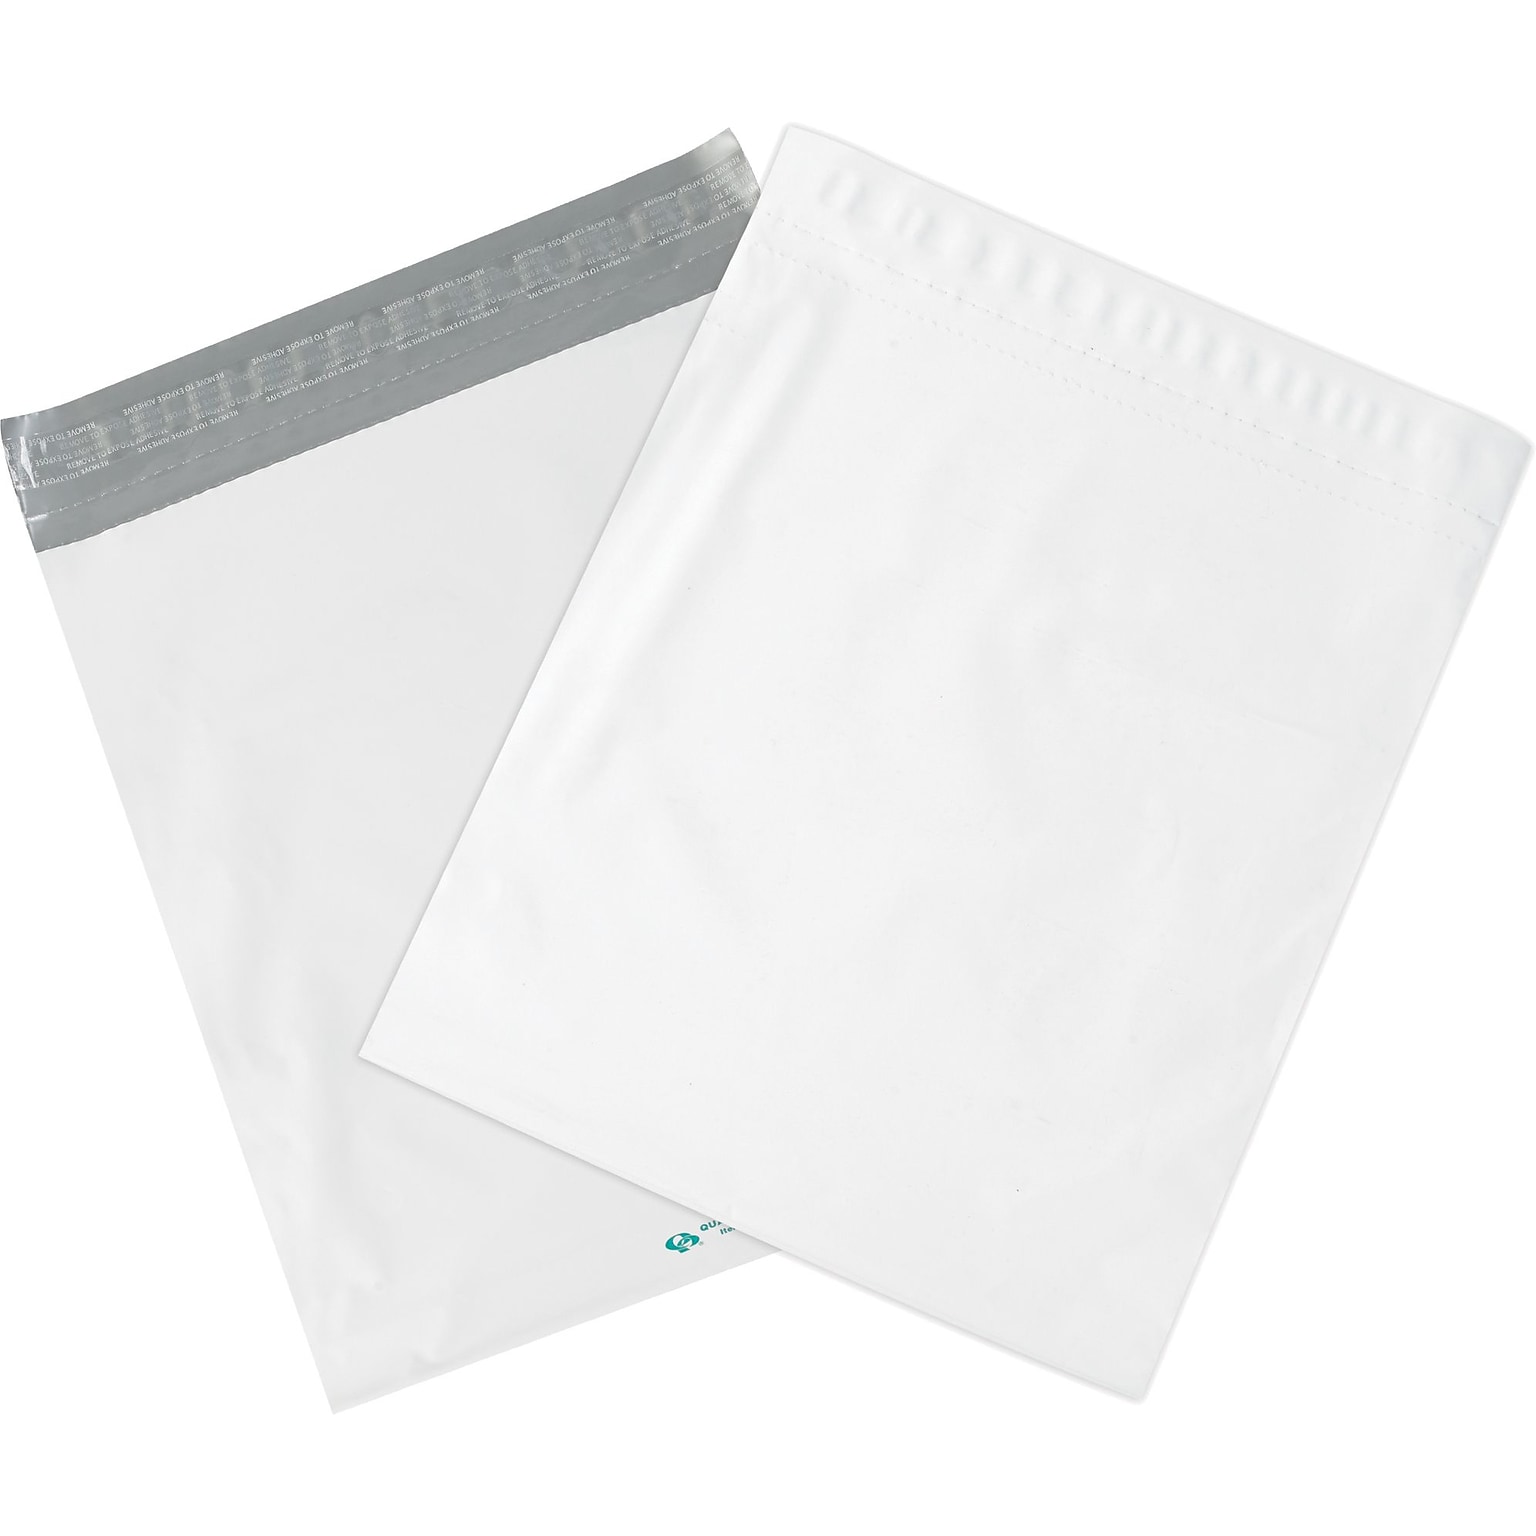 Partners Brand Expansion Poly Mailers, 11 x 13 x 4, White, 100/Case (EPM11134)